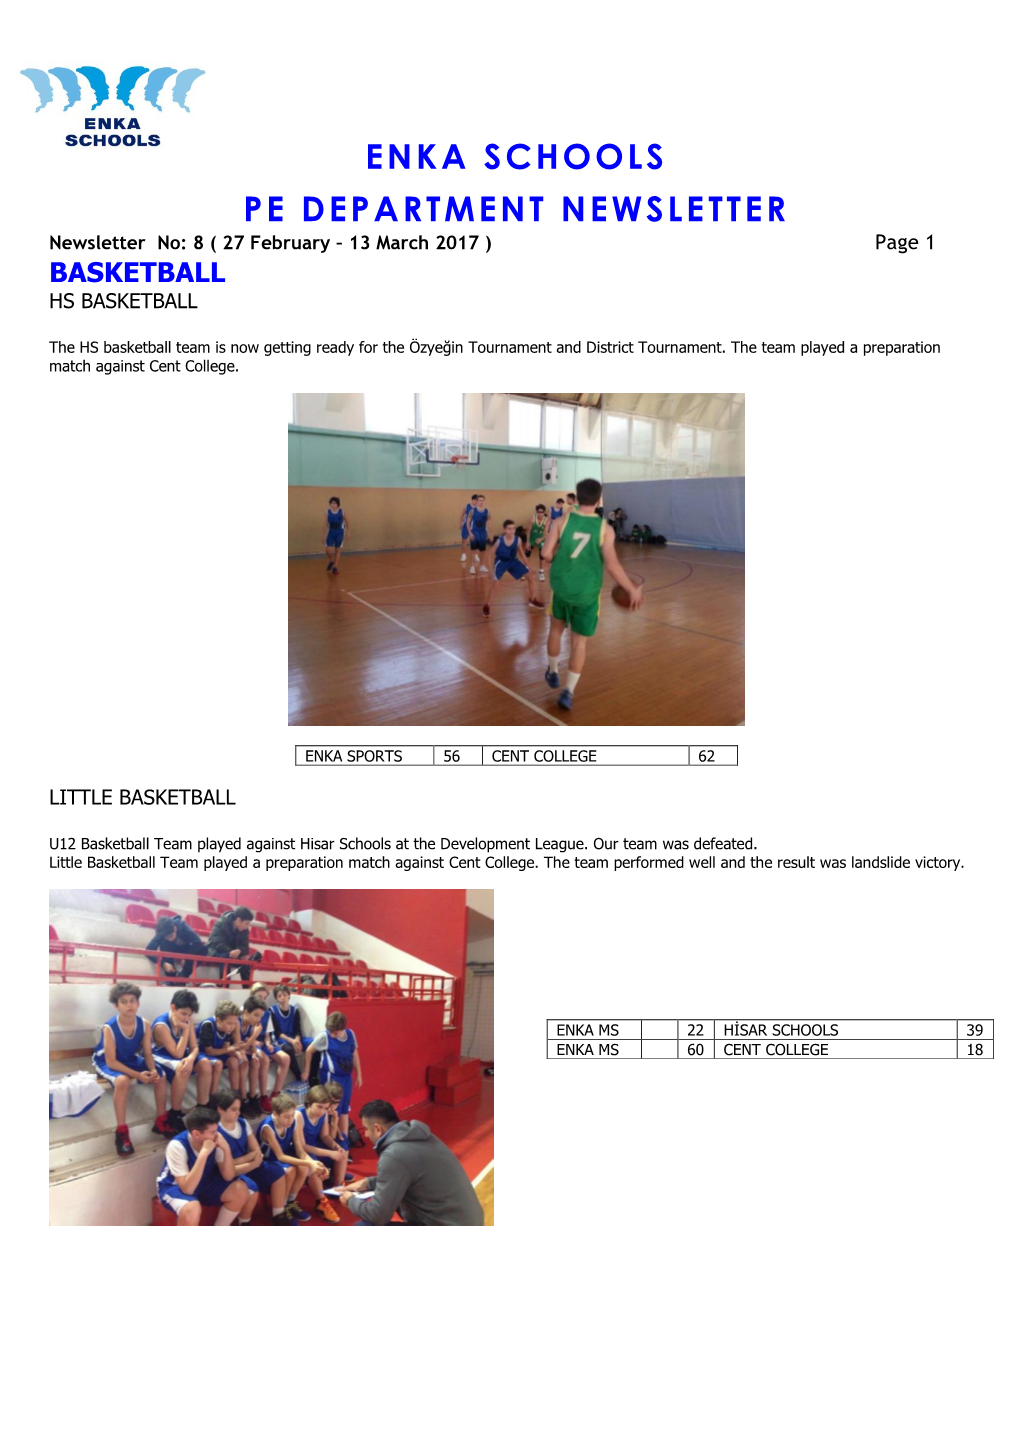 ENKA SCHOOLS PE DEPARTMENT NEWSLETTER Newsletter No: 8 ( 27 February – 13 March 2017 ) Page 1 BASKETBALL HS BASKETBALL